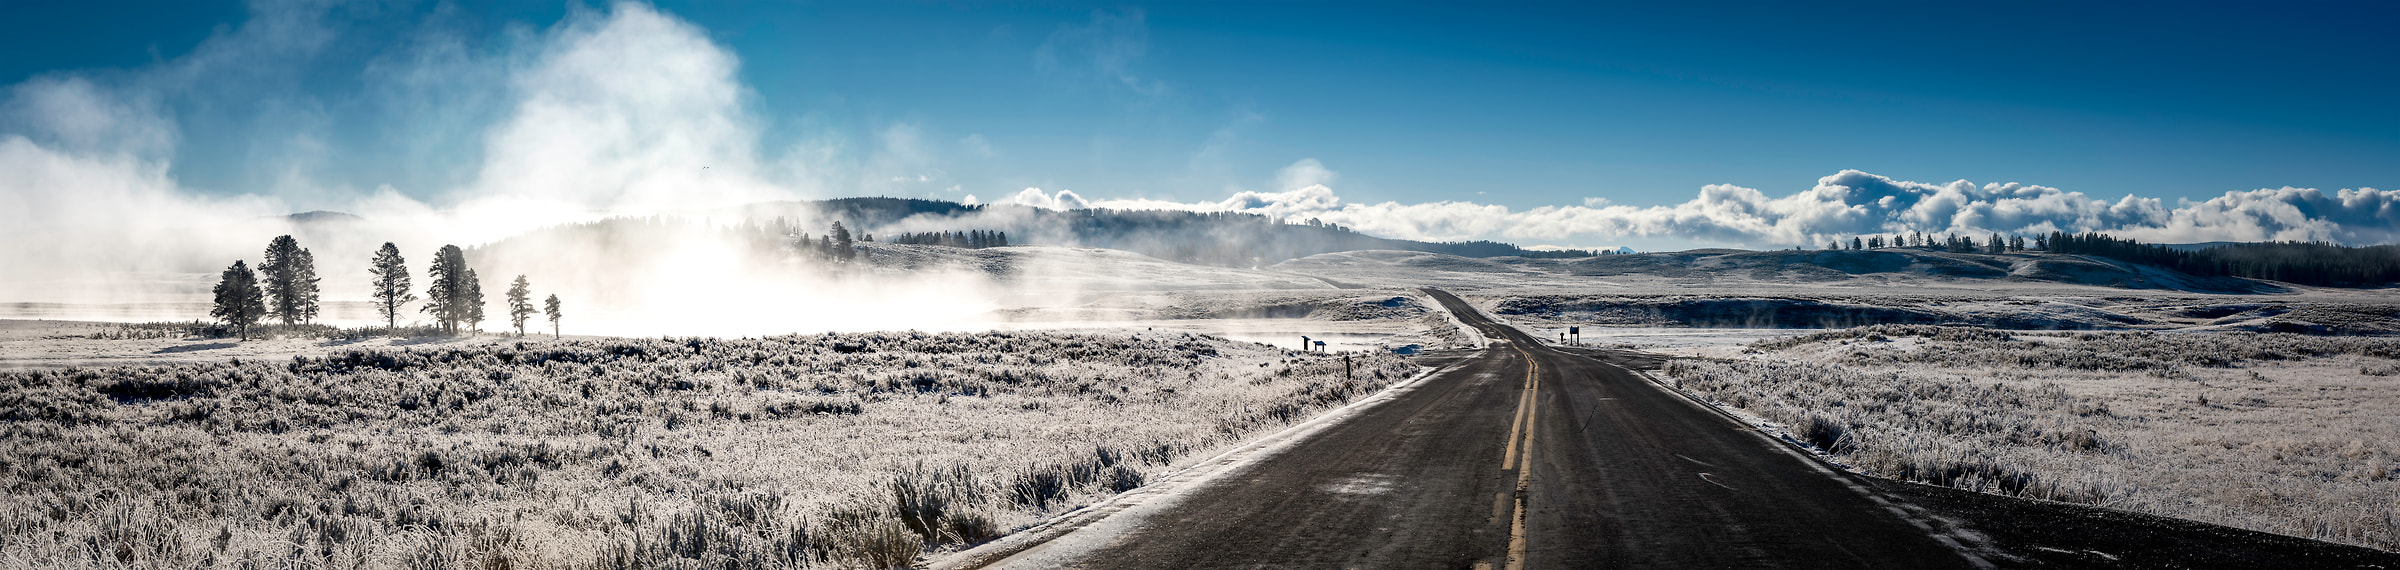 396 megapixels! A very high resolution, large-format VAST photo print of snow in Yellowstone National Park with a road heading off into the distance and trees on a hill; photo created by Justin Katz in Wyoming.